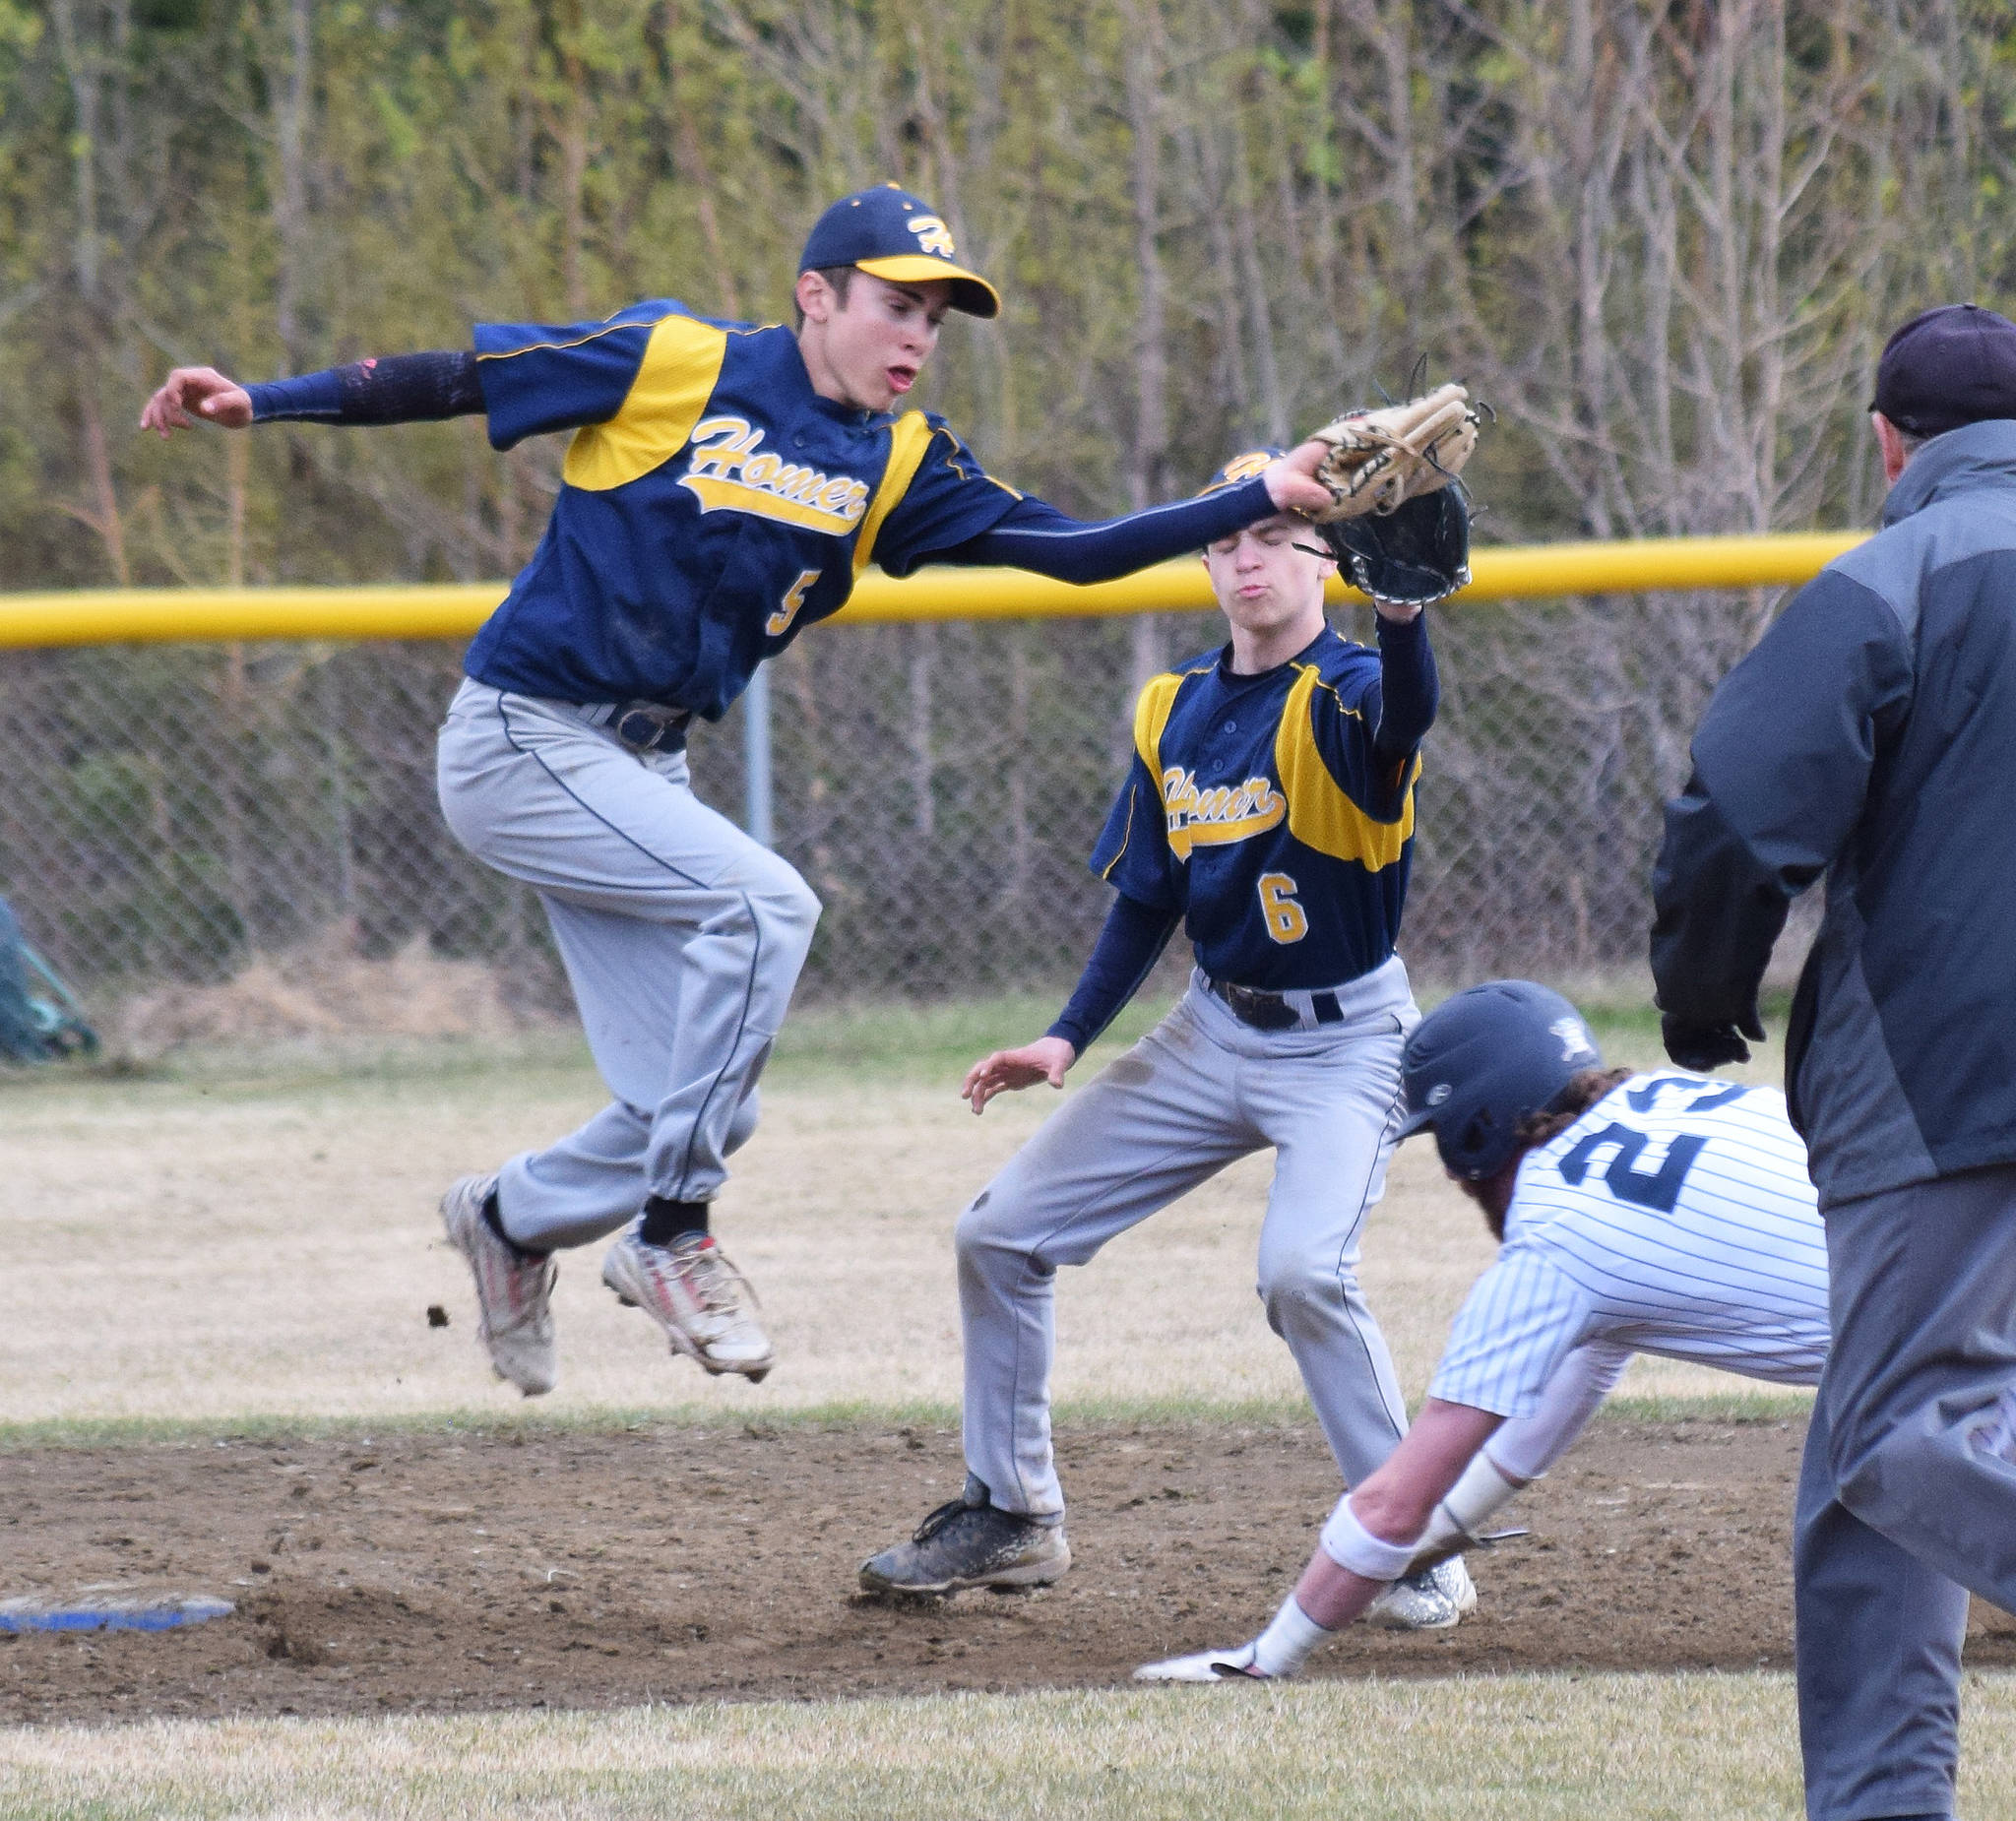 Homer’s Austin Ceccerelli (left) attempts to catch Soldotna’s David Michael stealing second base Wednesday, May 15, 2019, at the Soldotna Little League Fields in Soldotna, Alaska. (Photo by Joey Klecka/Peninsula Clarion)